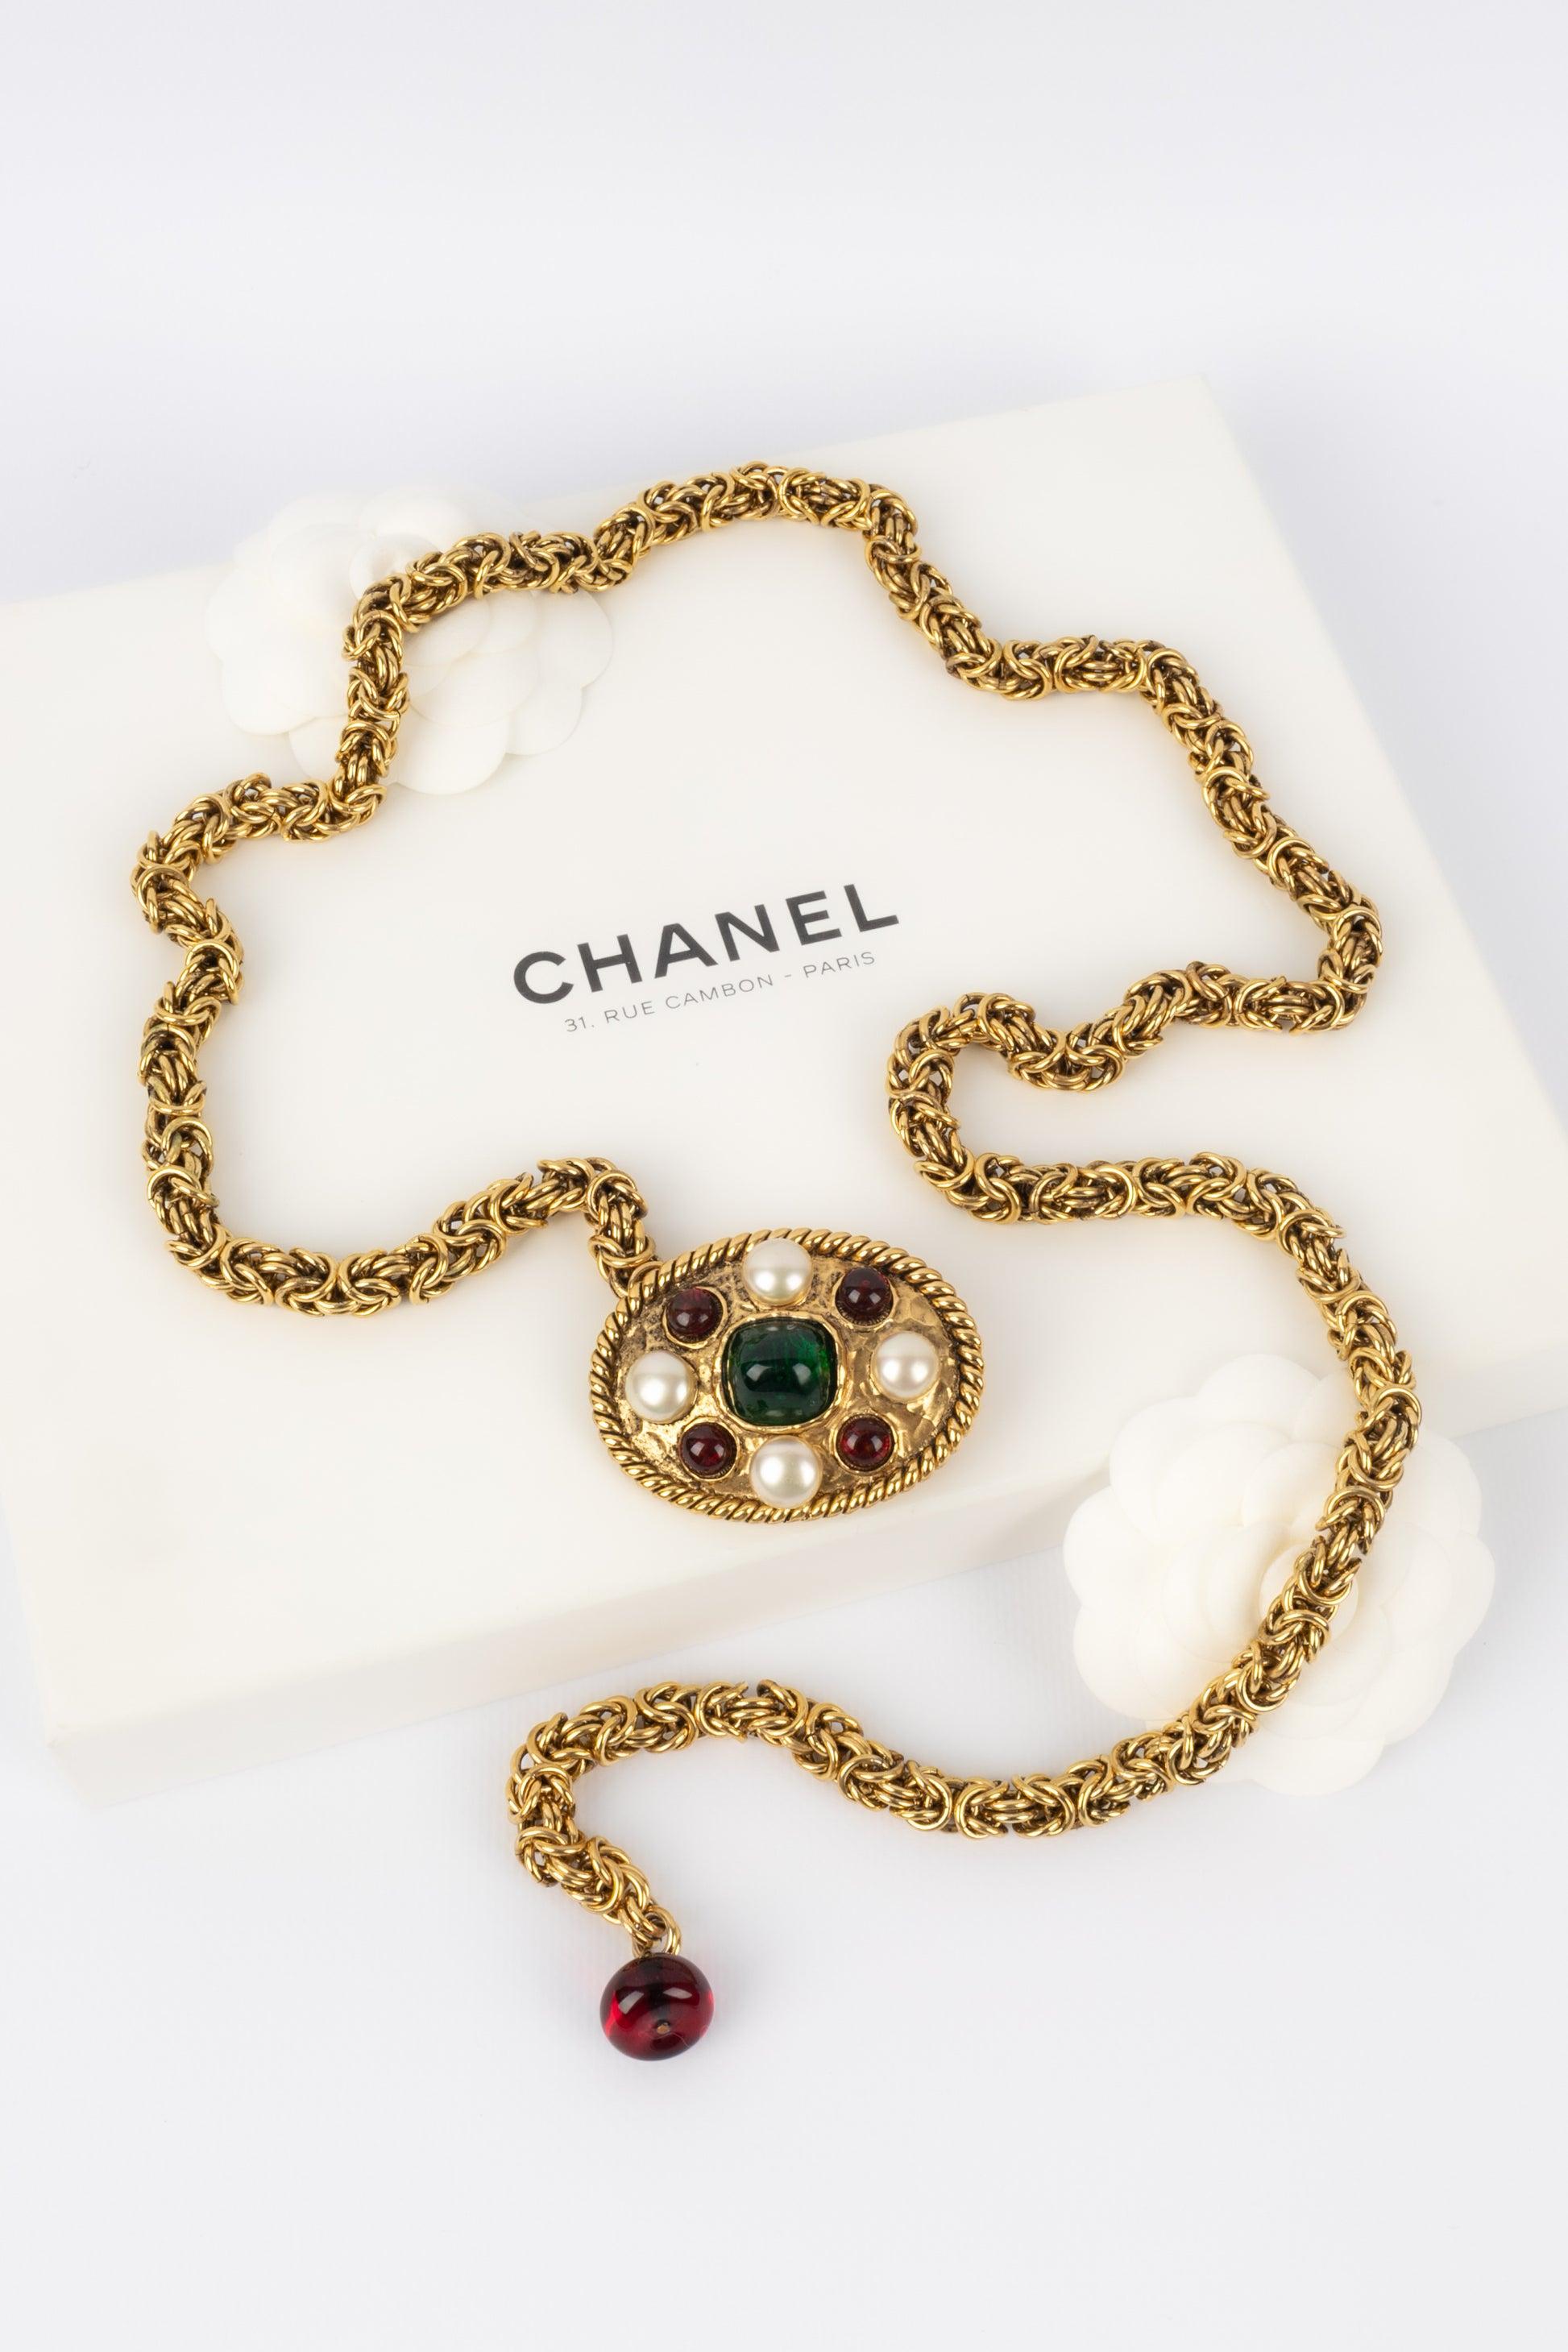 Chanel - Golden metal belt with glass paste. You can wear it as a necklace.

Additional information:
Condition: Very good condition
Dimensions: Length: 99 cm

Seller Reference: ACC53